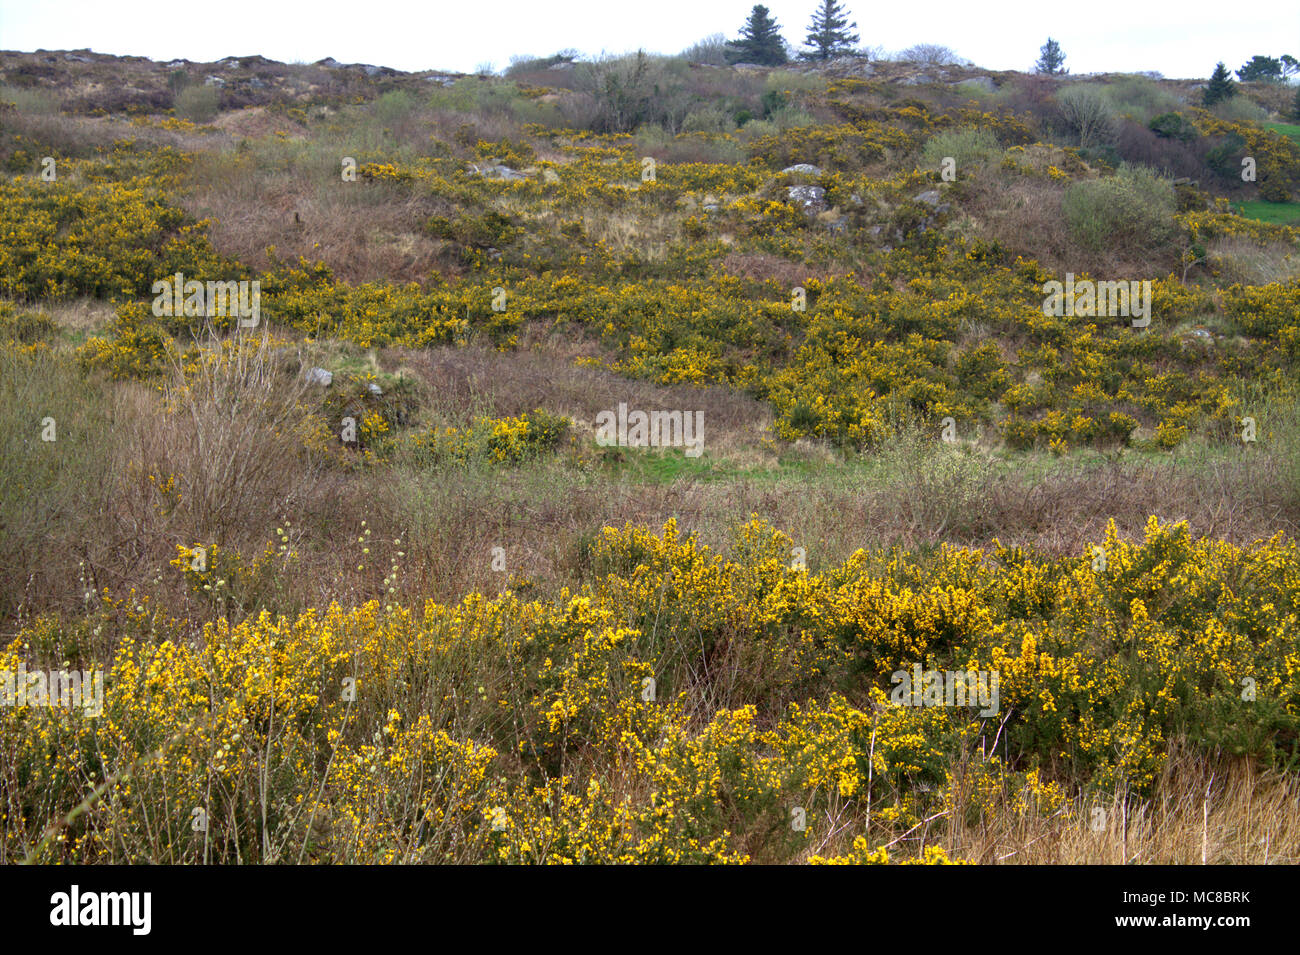 Ulex europaeus, gorse in full flower in the spring covering an irish hillside in bright yellow flowers. Stock Photo